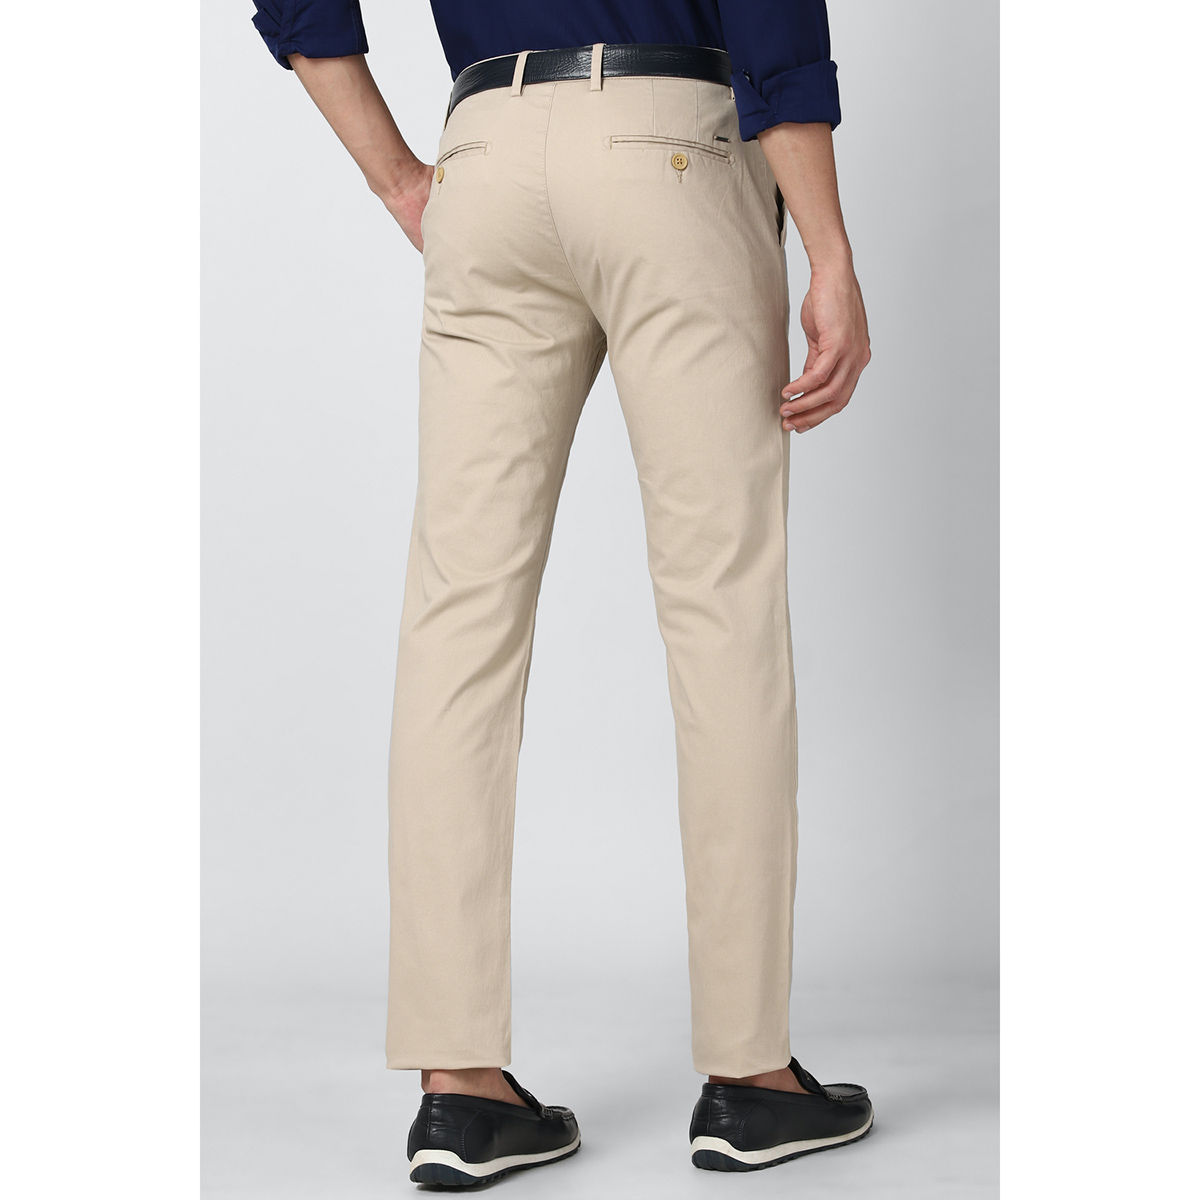 Buy Men Beige Solid Carrot Fit Casual Trousers Online - 790594 | Peter  England